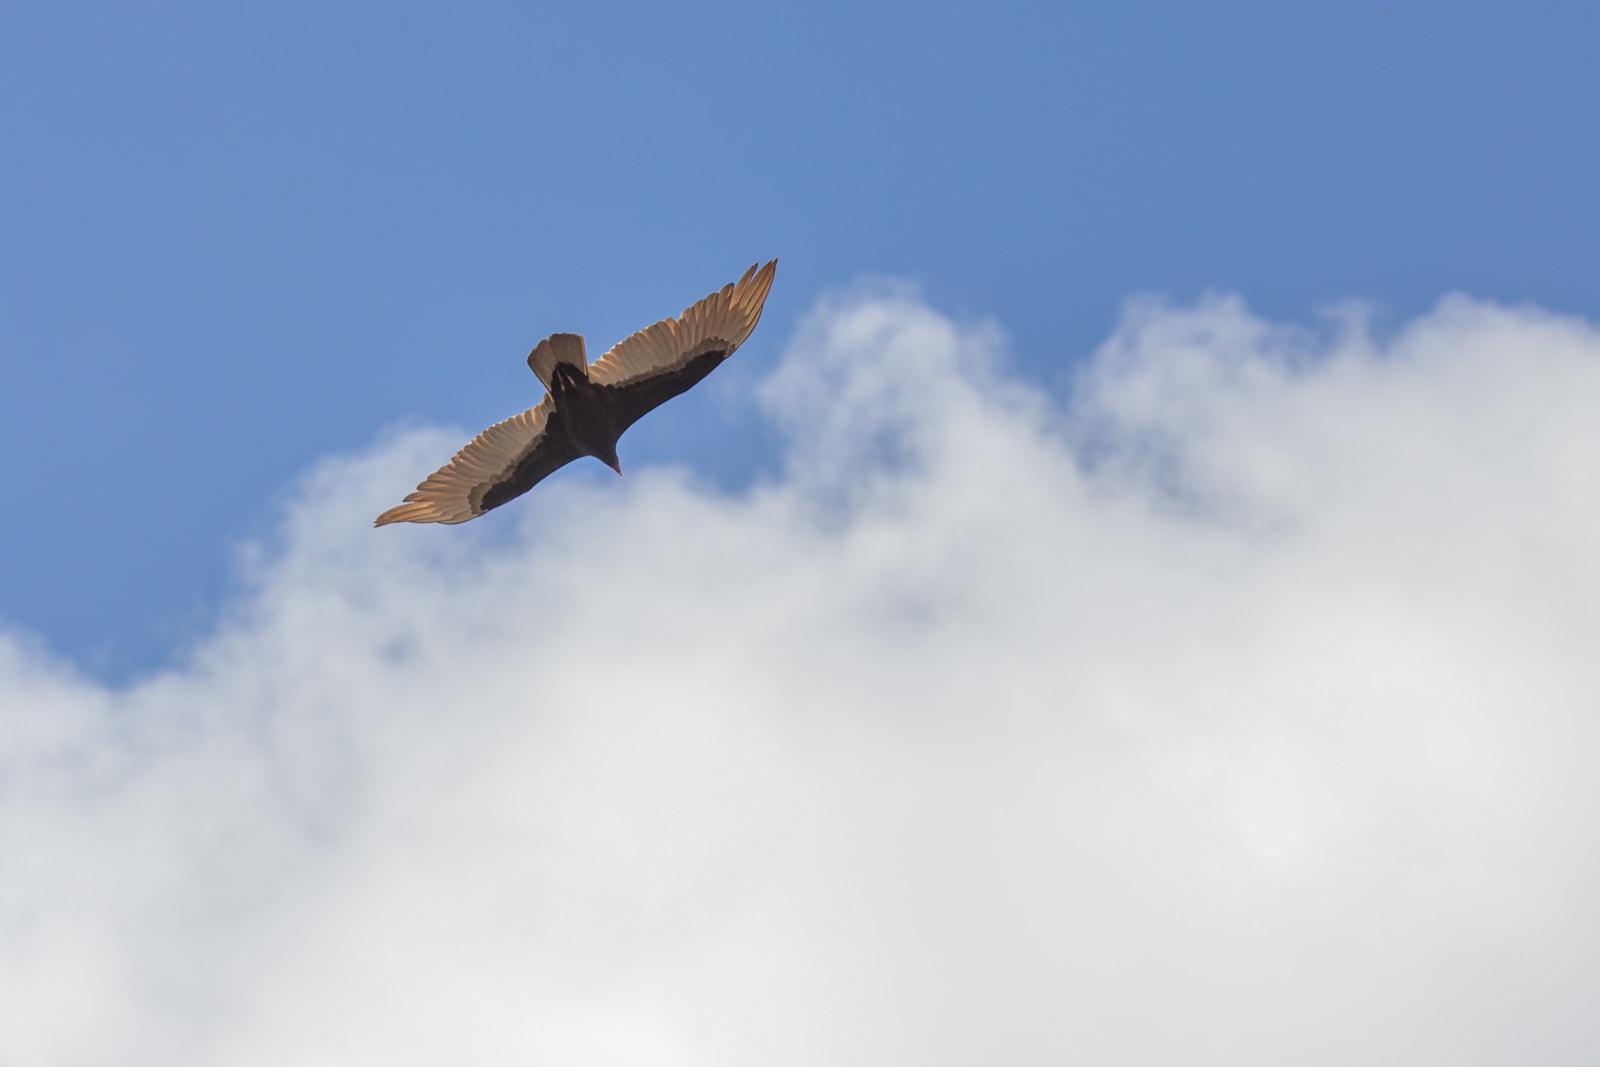 A Turkey vulture flying in the sky